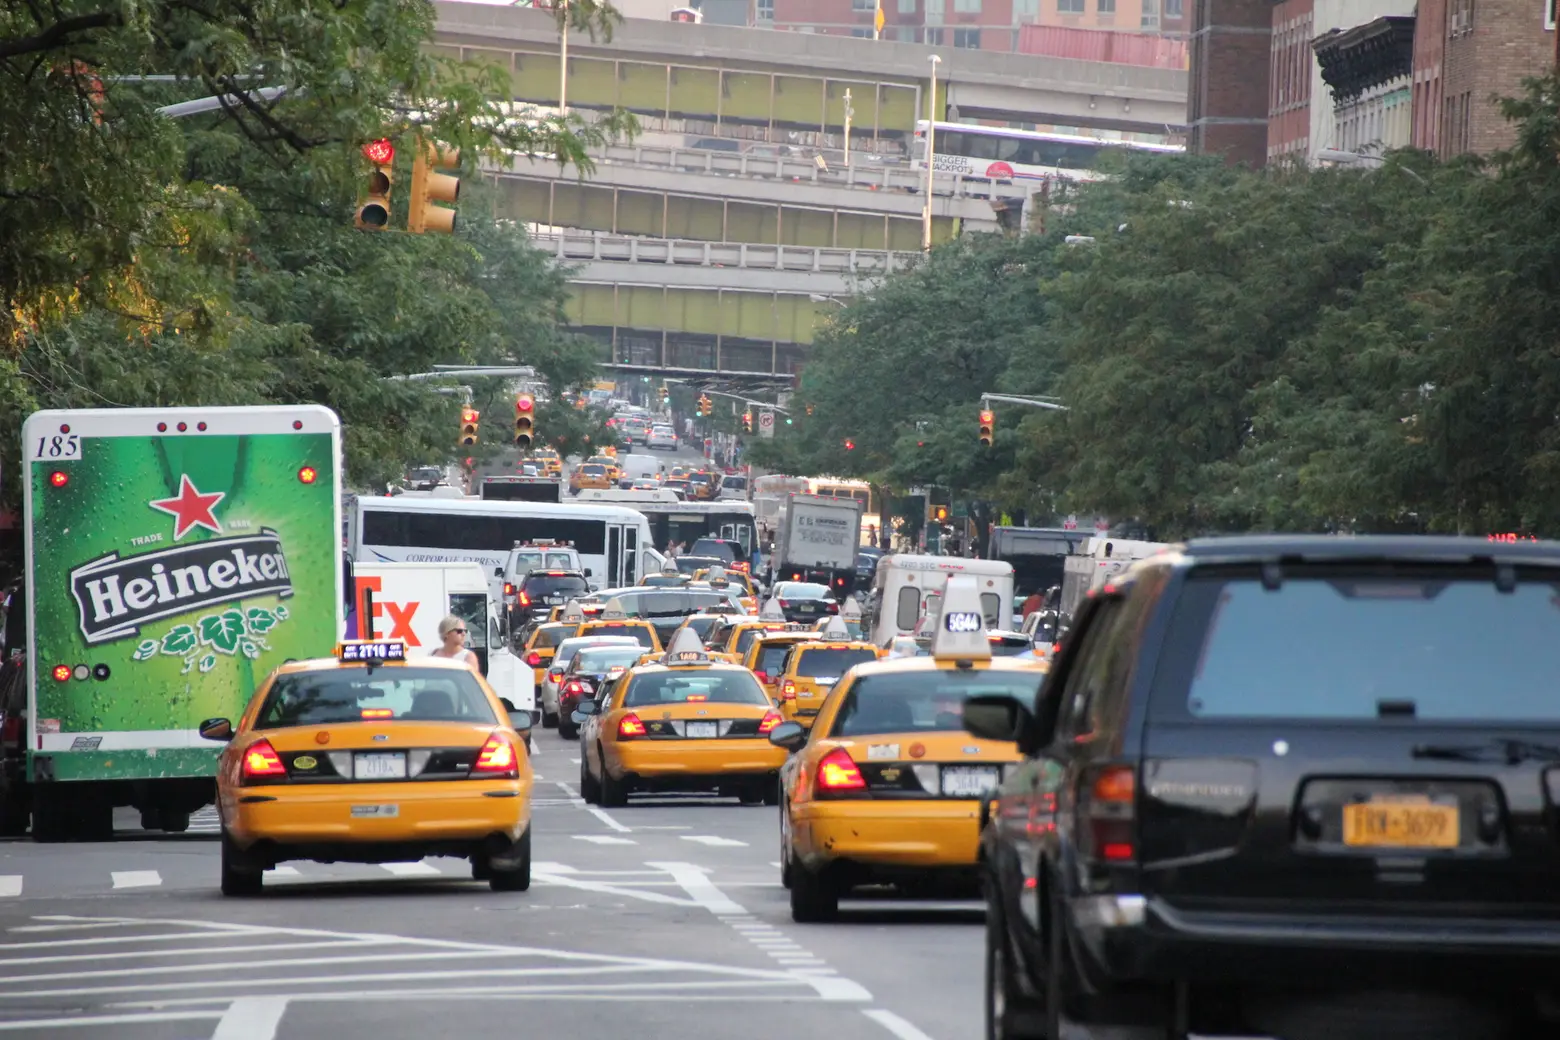 Drivers will likely pay $15 to enter certain parts of Manhattan as part of congestion pricing plan